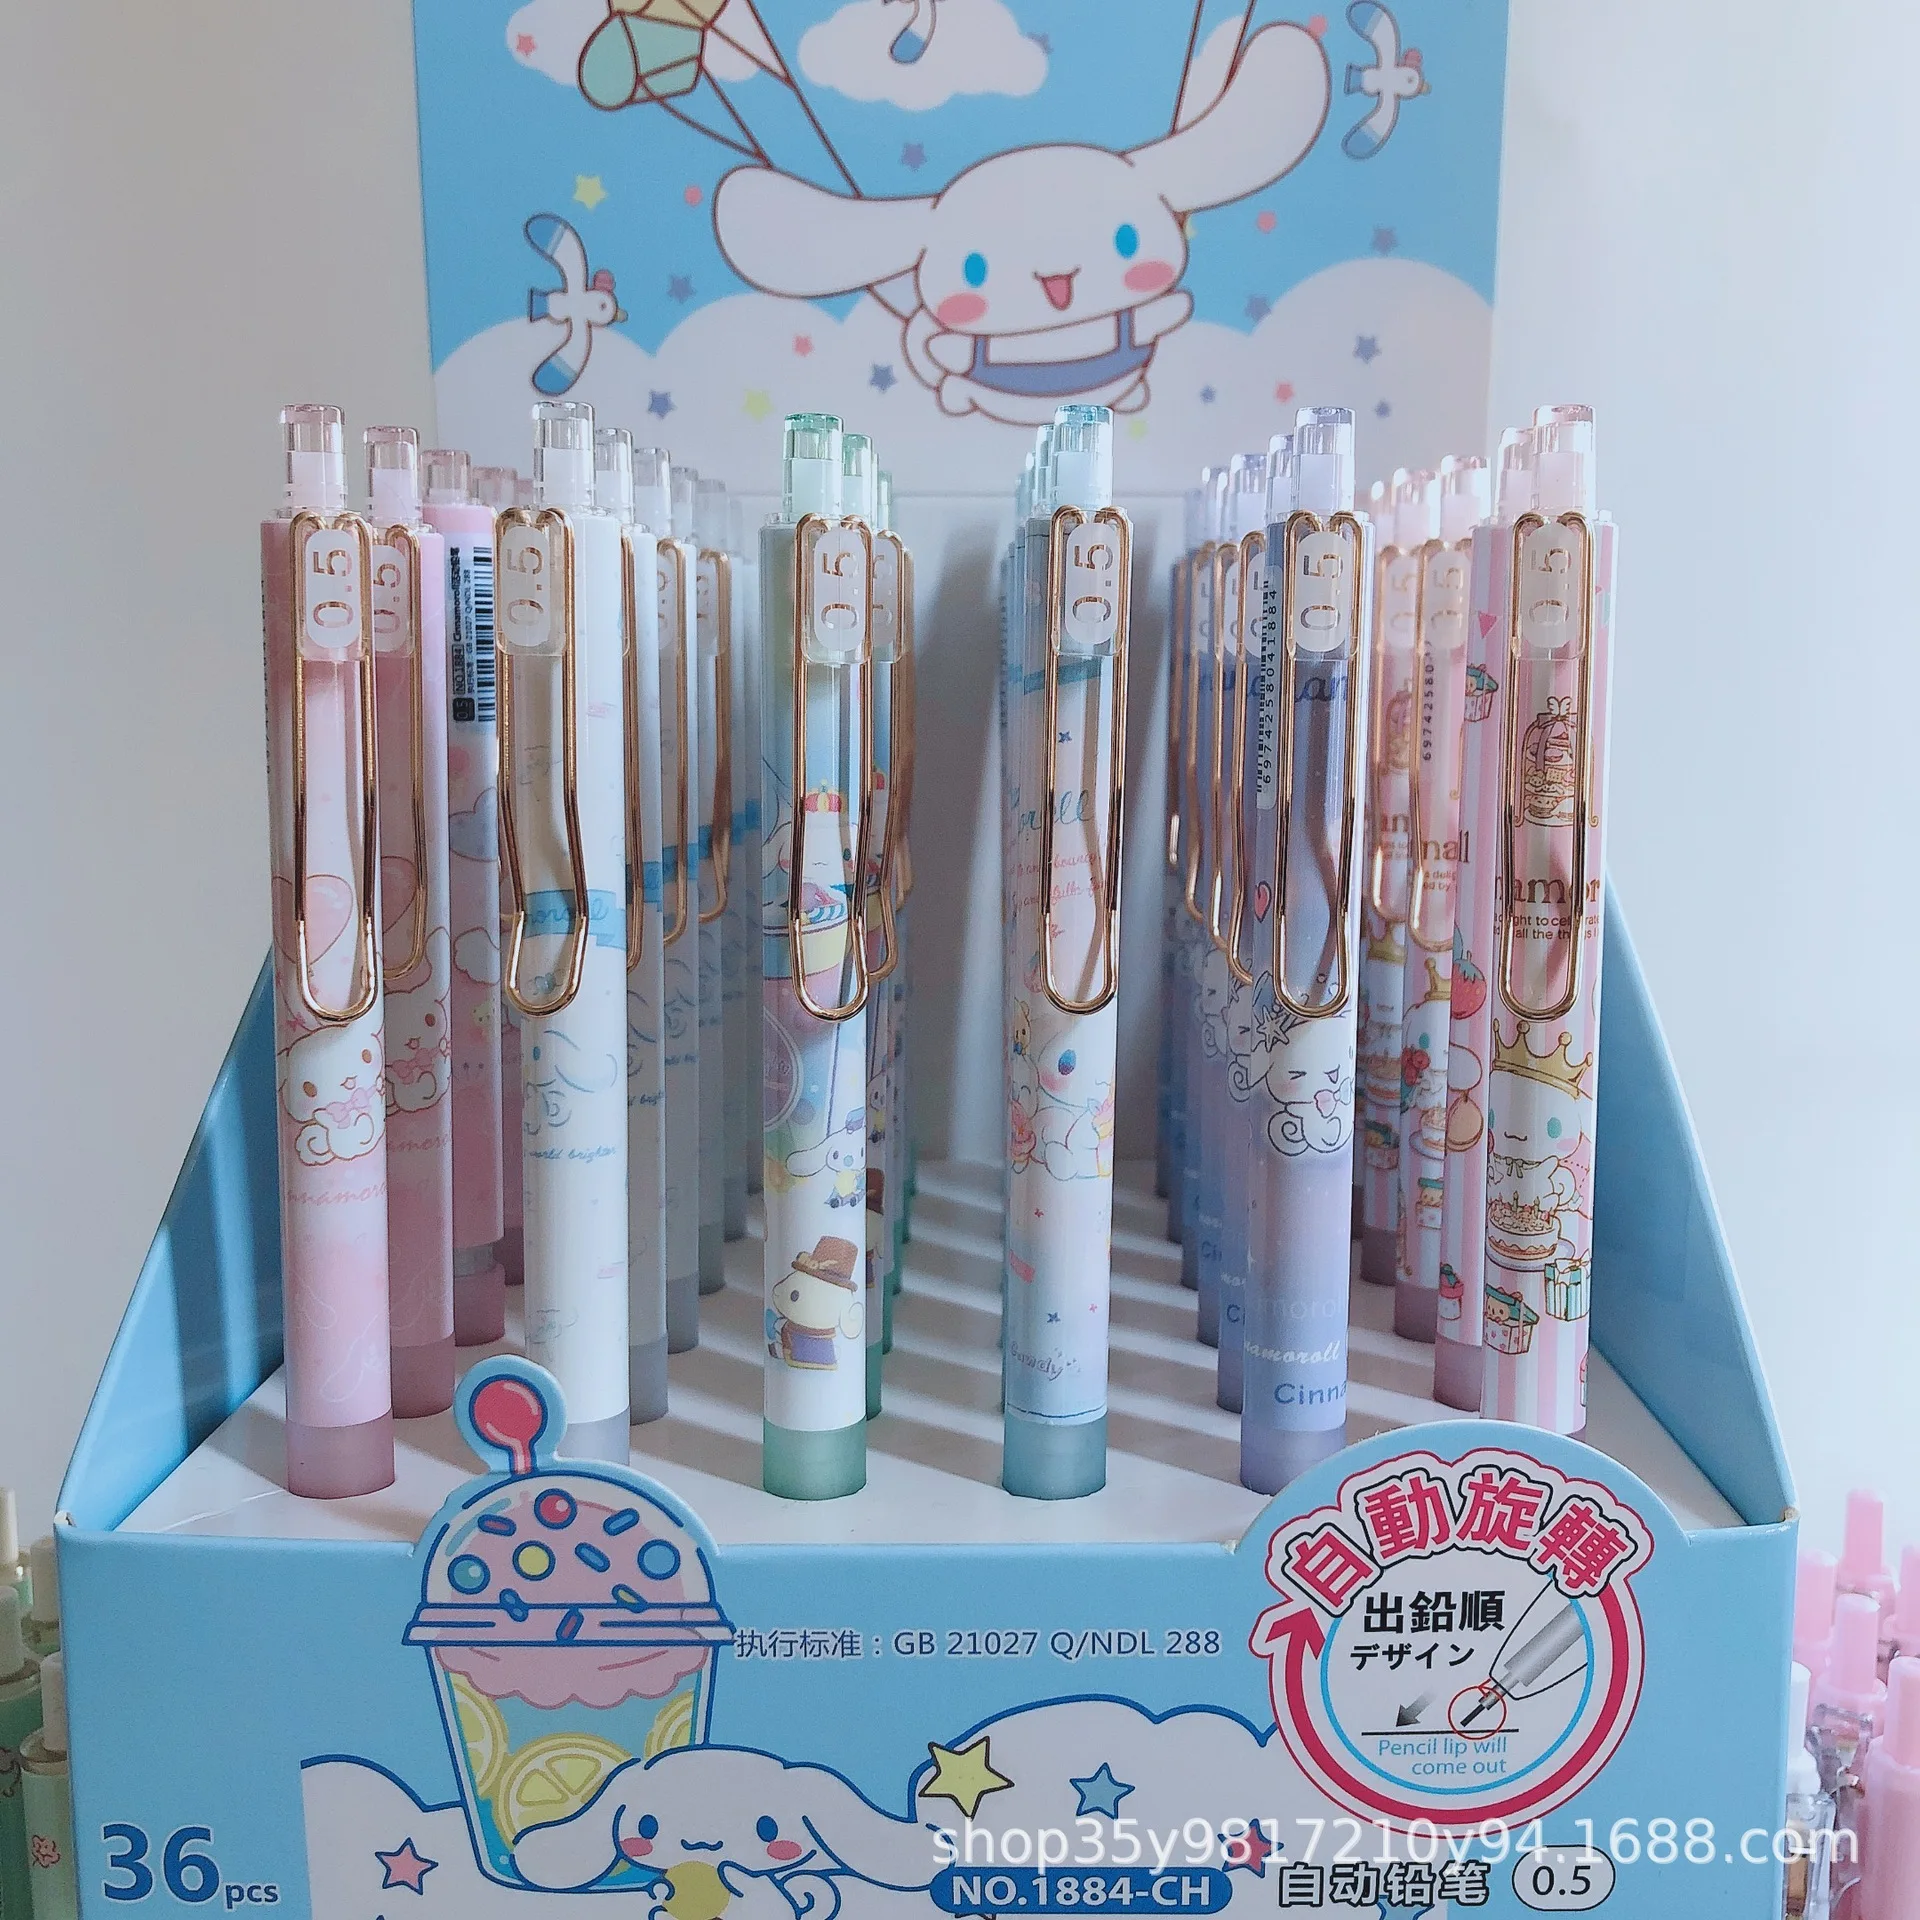 Sanrio neutral pen kawaii Cinnamoroll series cartoon touch pen lovely student stationery school supplies children's gifts 5pcs lot lovely plastic unicorn hair bands birthday supplies for kids girls headband with teeth hair hoop chic hair accessories